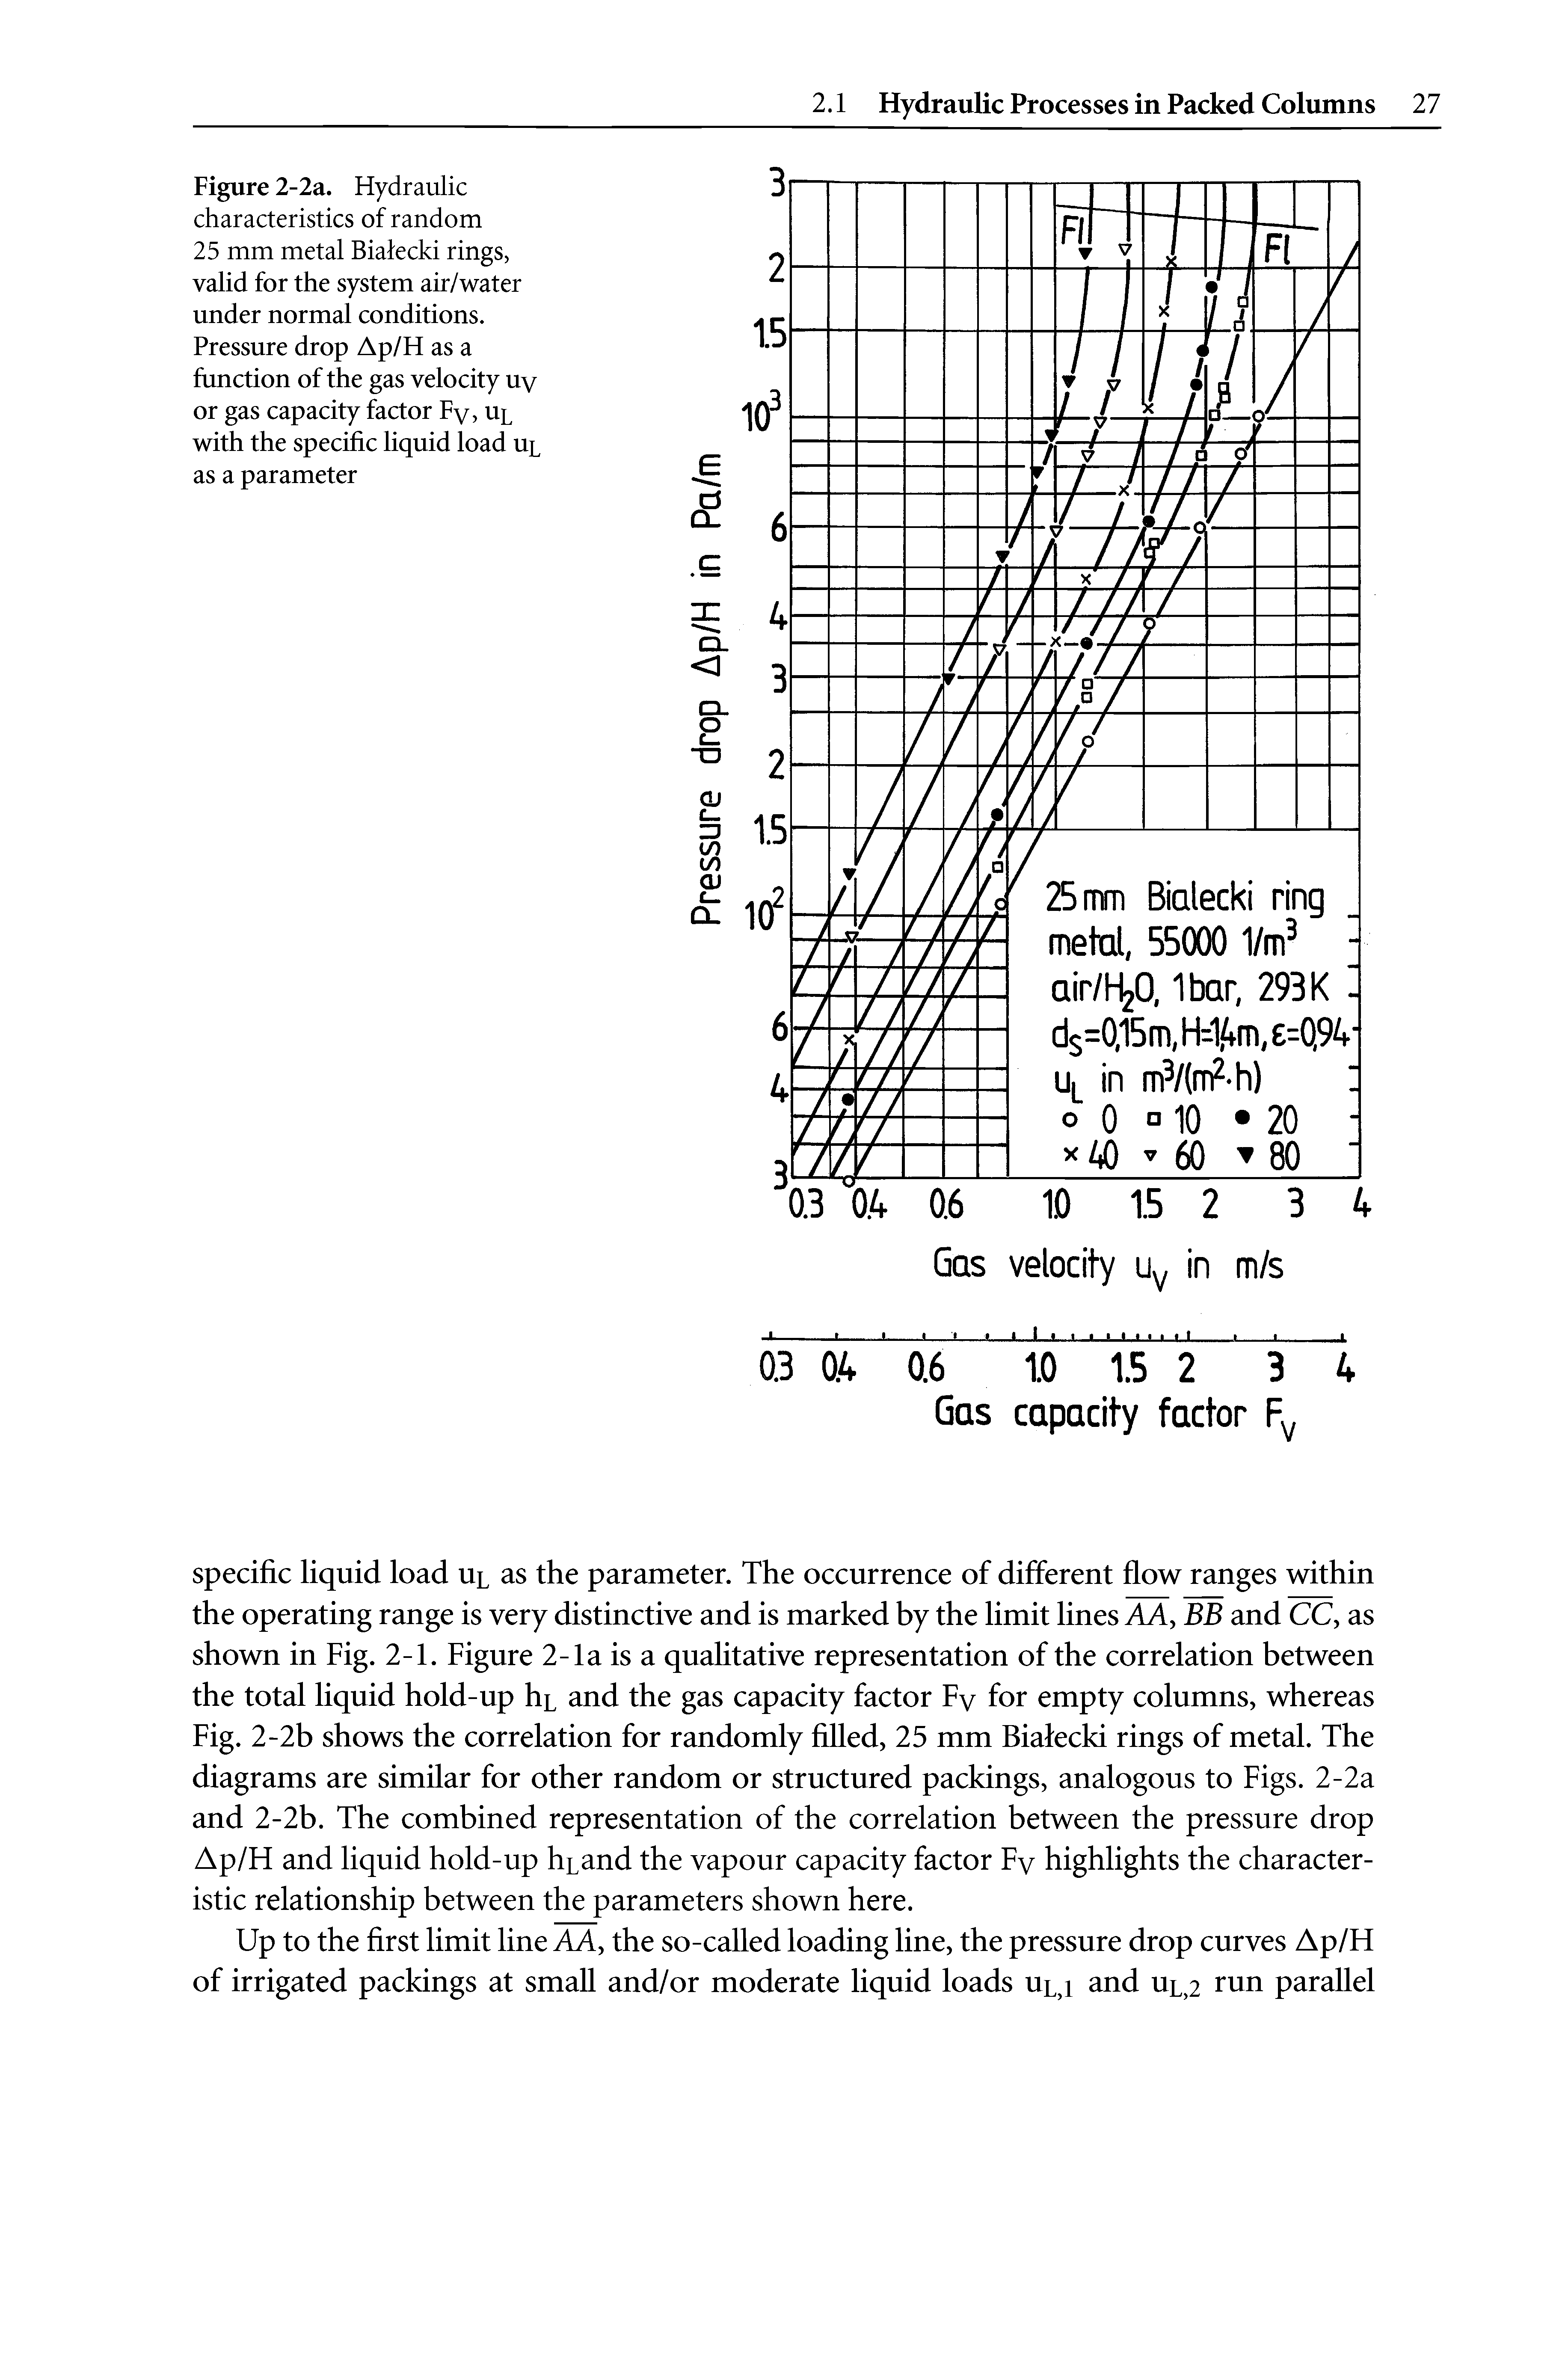 Figure 2-2a. Hydraulic characteristics of random 25 mm metal Biatecki rings, valid for the system air/water under normal conditions. Pressure drop Ap/H as a function of the gas velocity uy or gas capacity factor Fy, ul with the specific liquid load ul as a parameter...